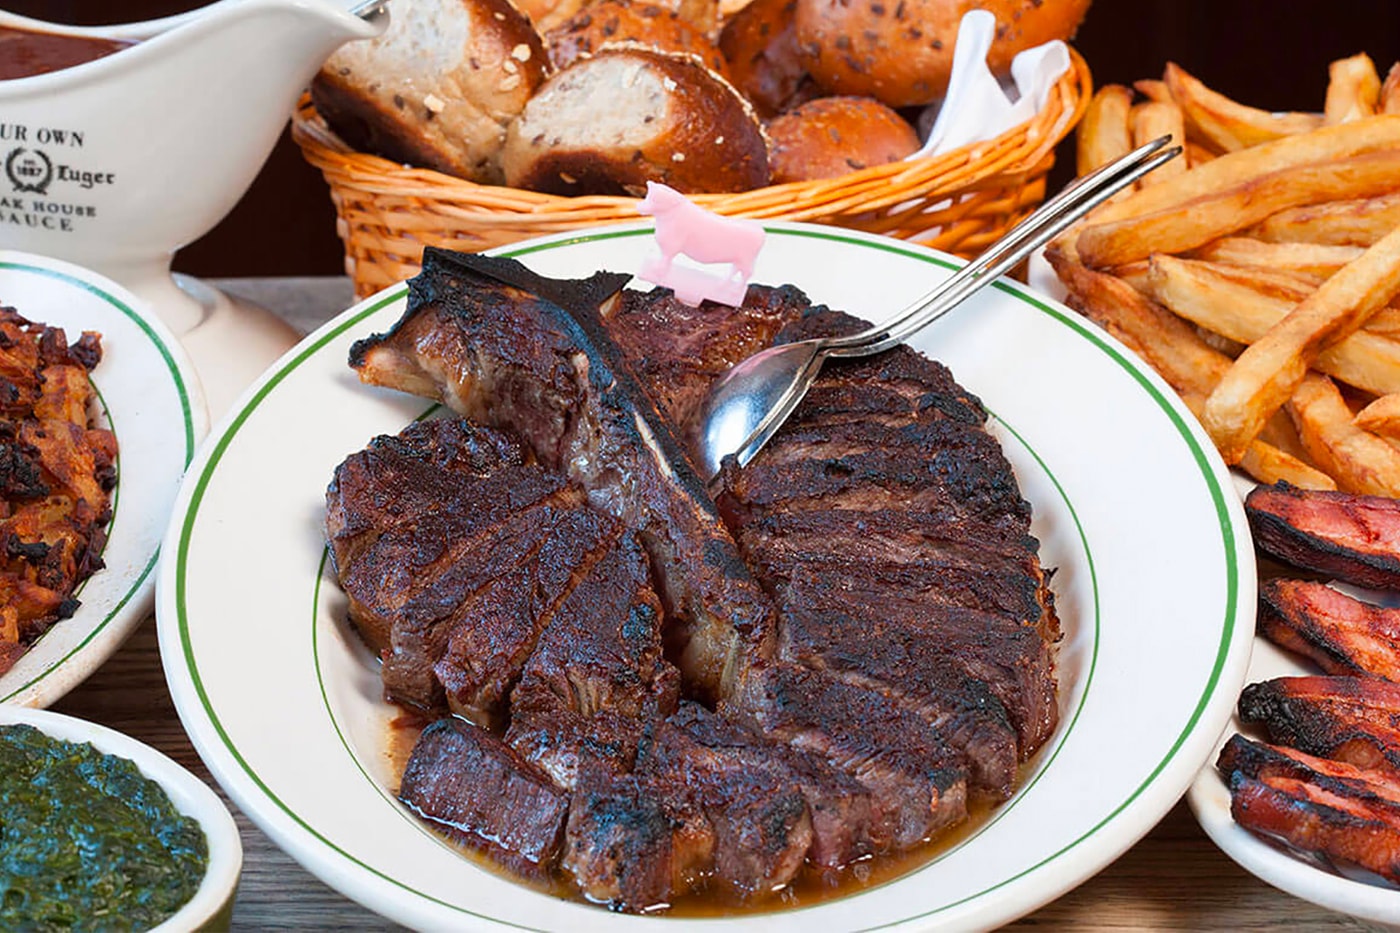 Peter Luger Dry-Aged Steak Pickup Delivery Info Caviar Credit Card Coronavirus COVID 19